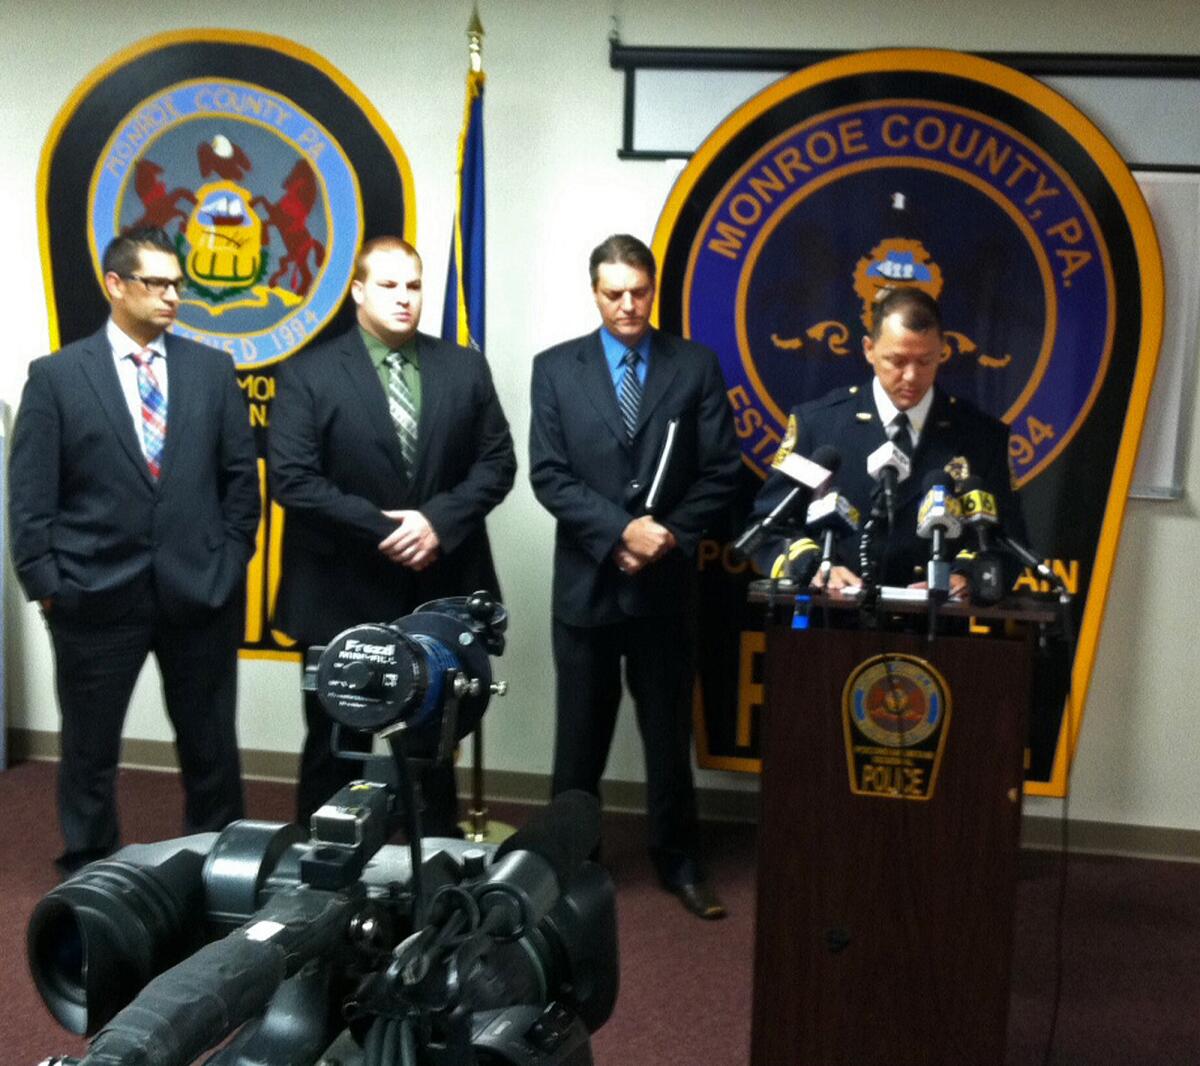 From left, Pocono Mountain Regional Police Department Cpl. Lucas Bray, Det. Robert Miller, Monroe County Assistant Dist. Atty. Michael Rakaczewski and Police Chief Christopher Wagner speak during a Tuesday news conference in Pocono Summit, Pa., about plans to arrest 37 people in the December 2013 death of 19-year-old Chun "Michael" Deng.